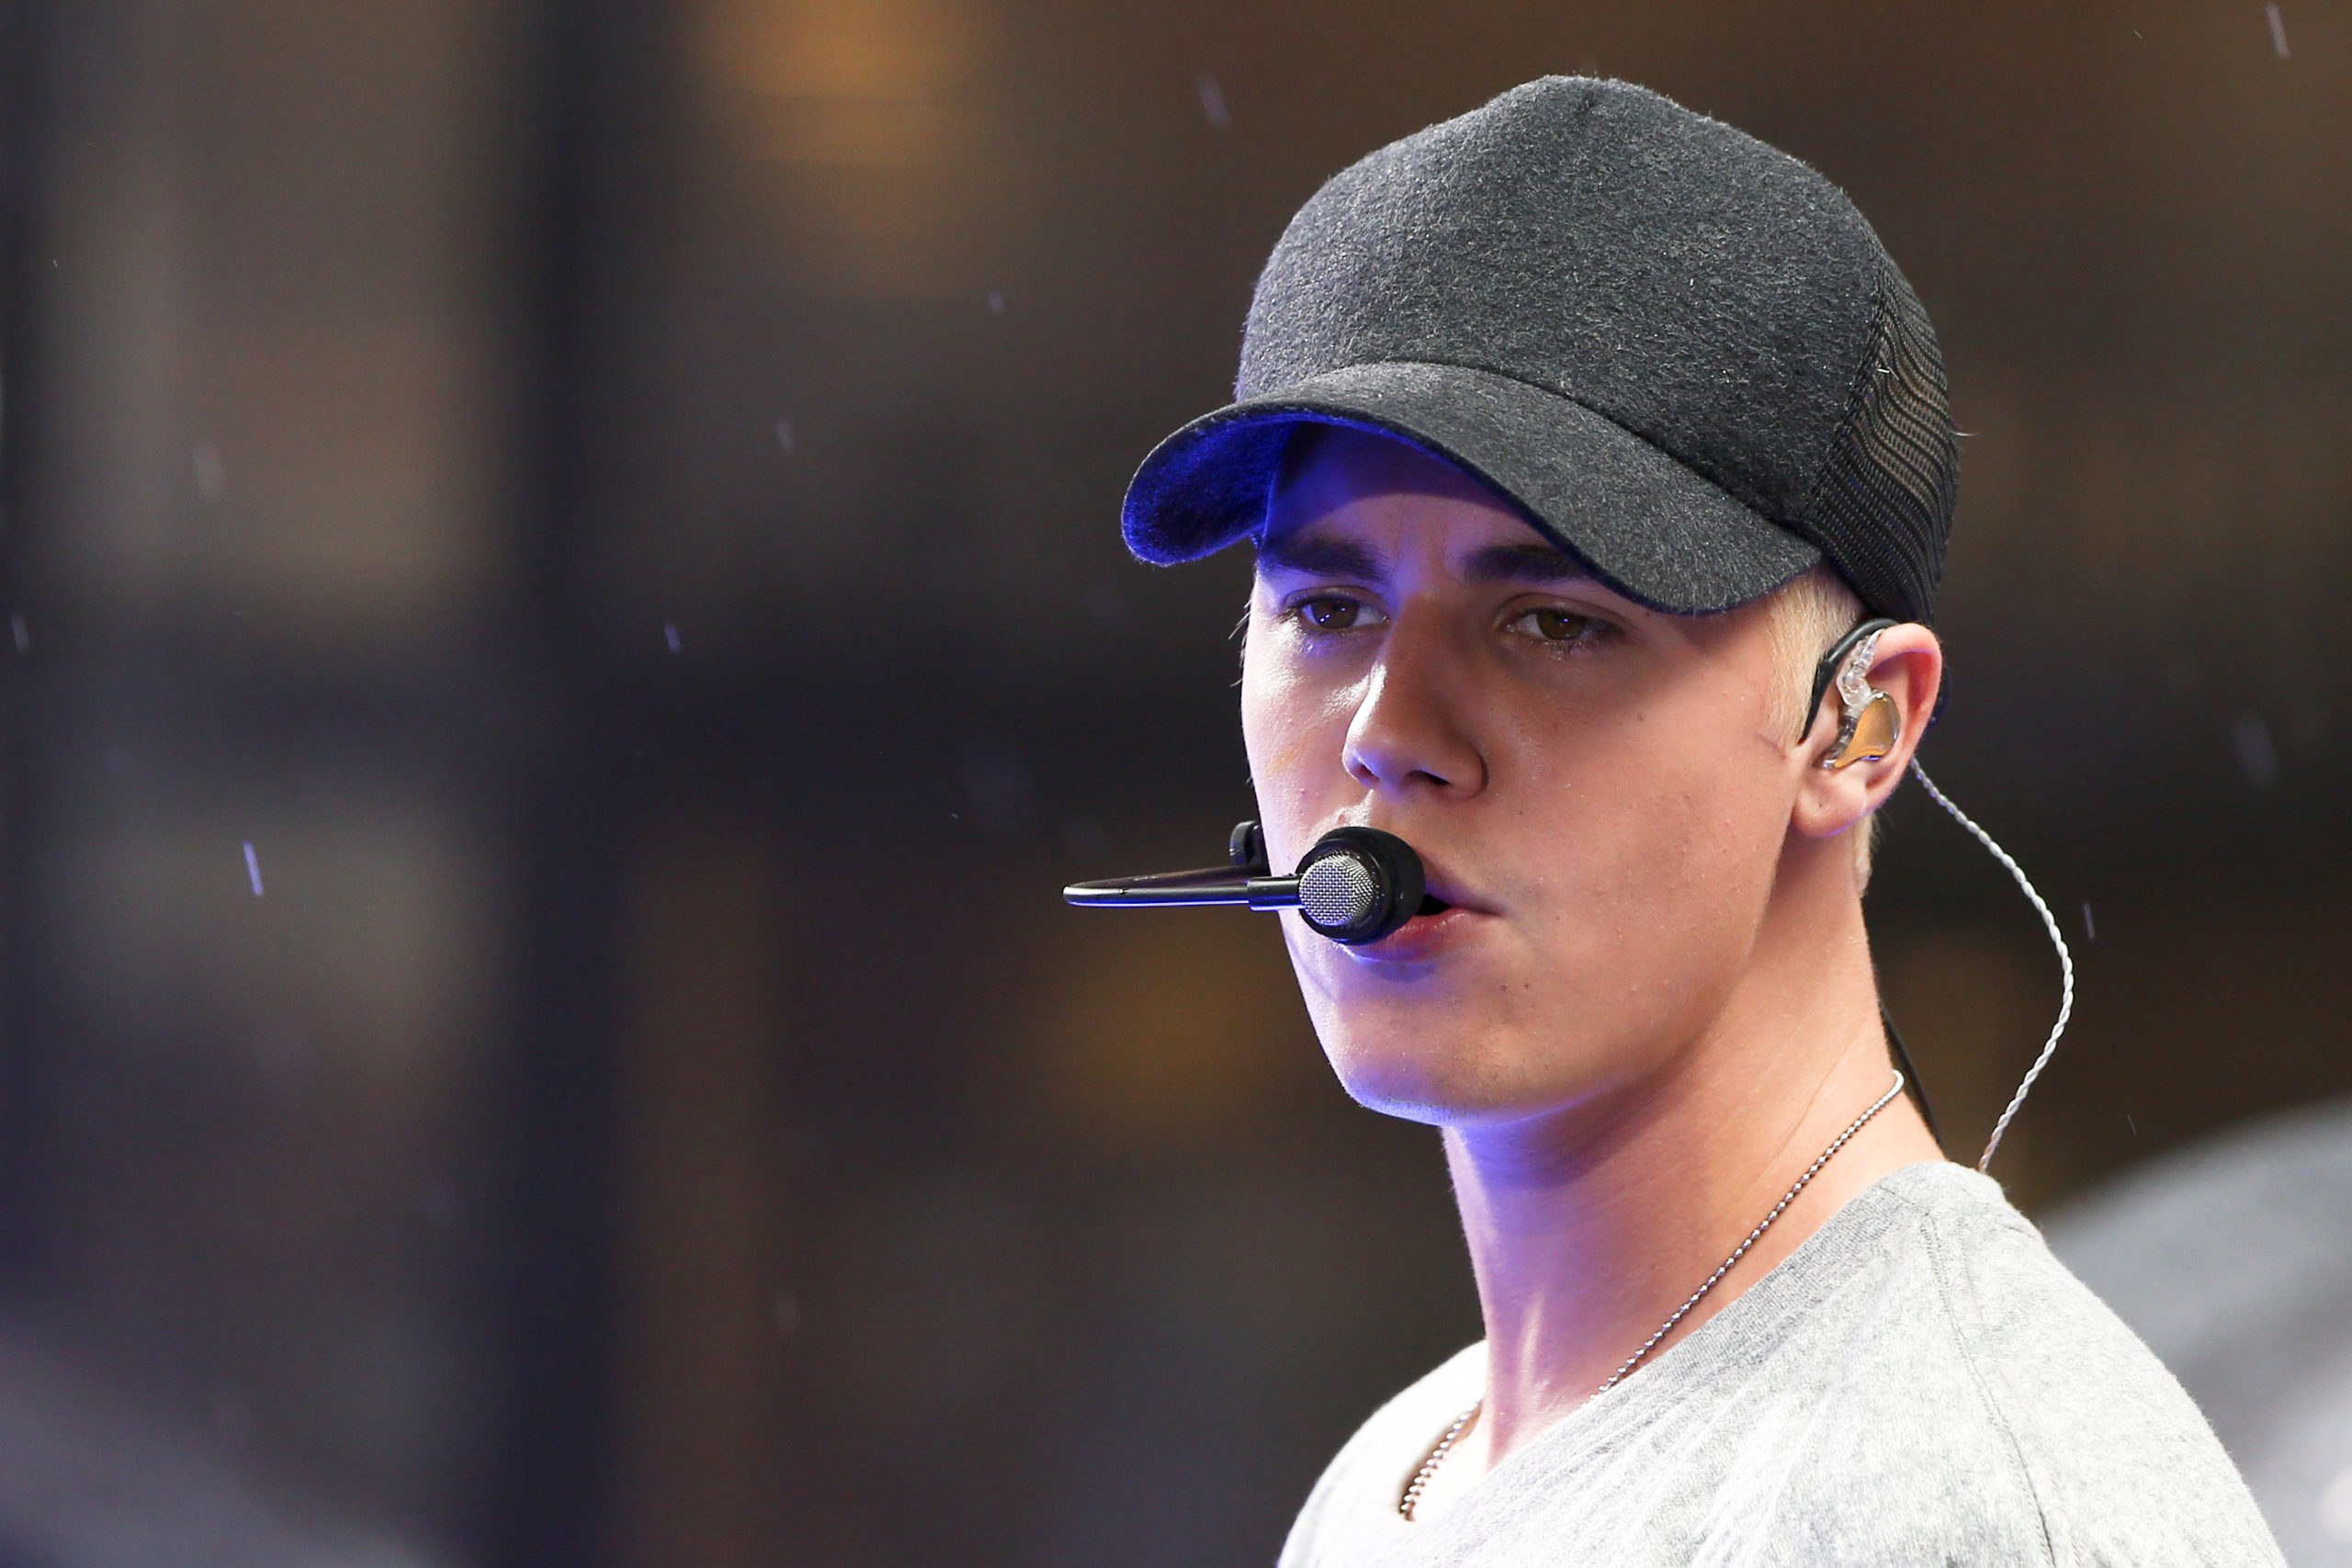 Justin Bieber Admits he Felt Like he Was 'Dying' During Battle With Substance Abuse